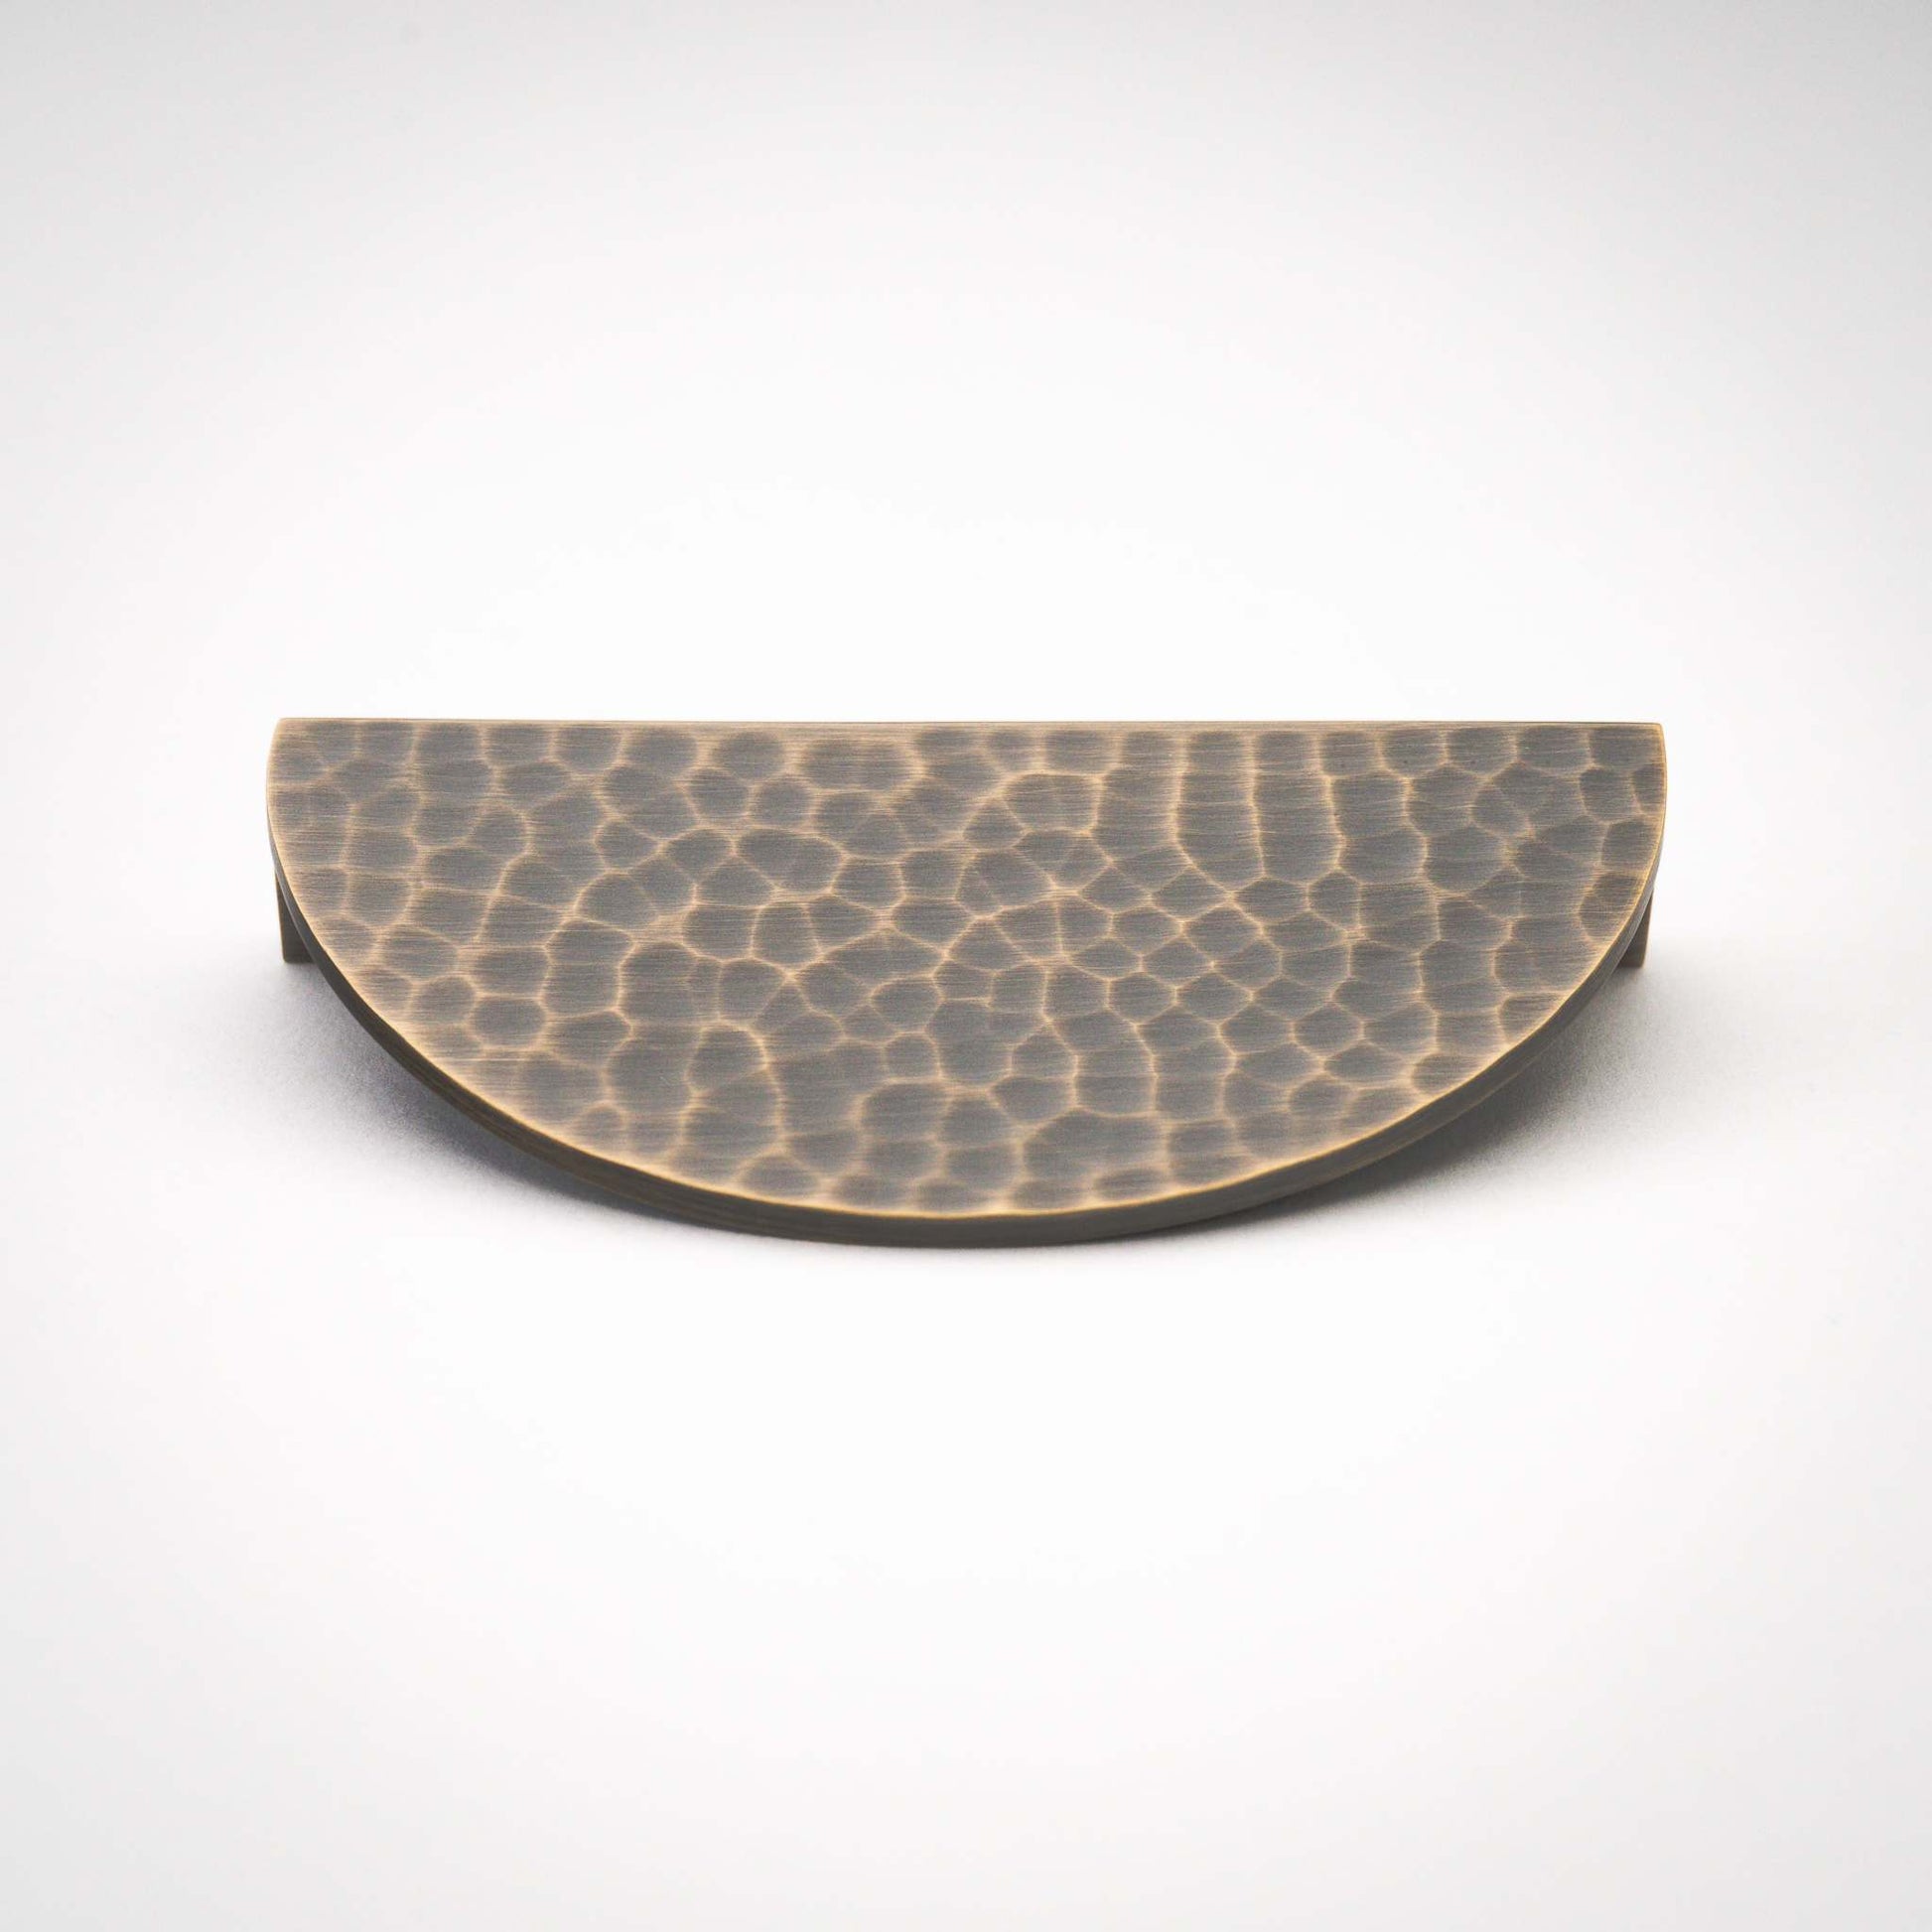 Hammered Demi Lune, Solid Brass Half Moon Cabinet PullsThis Demi Lune Hammered Pull is crafted from solid brass and finished with a unique hammered texture. With its half-moon shape, it's a charming addition to any kitchpullHammered Demi Lune, Solid Brass Half Moon Pulls